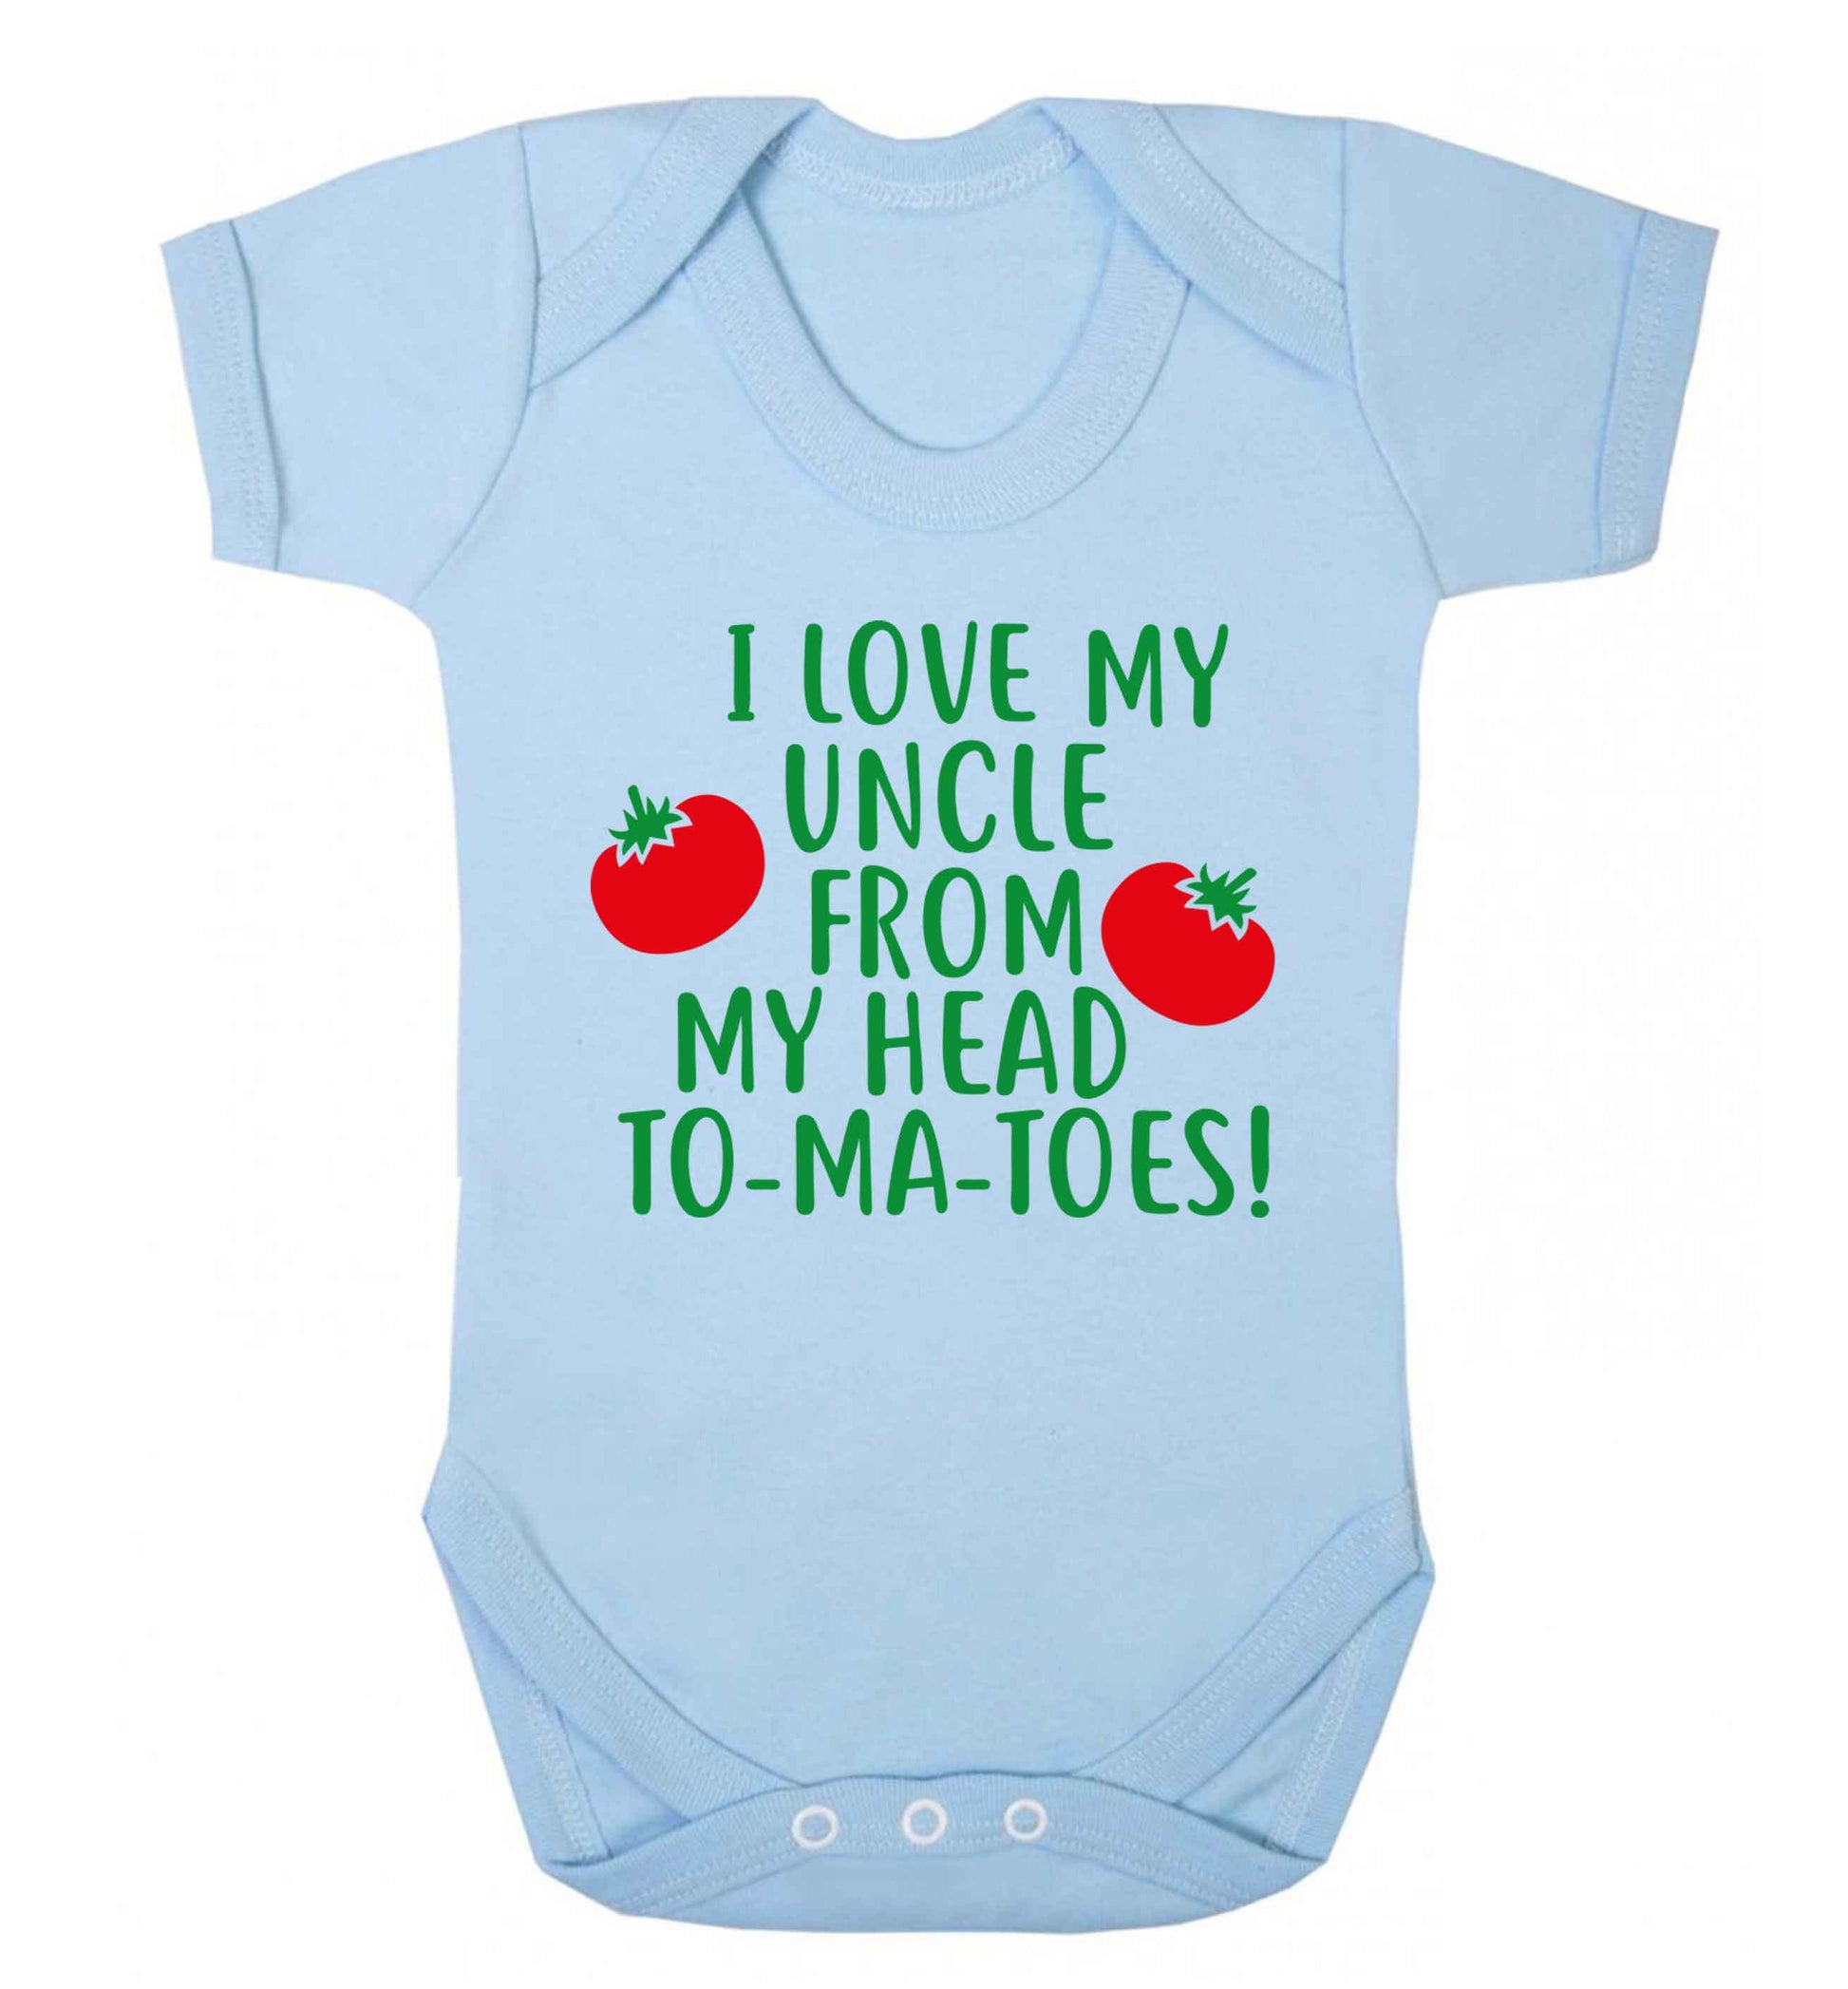 I love my uncle from my head To-Ma-Toes Baby Vest pale blue 18-24 months